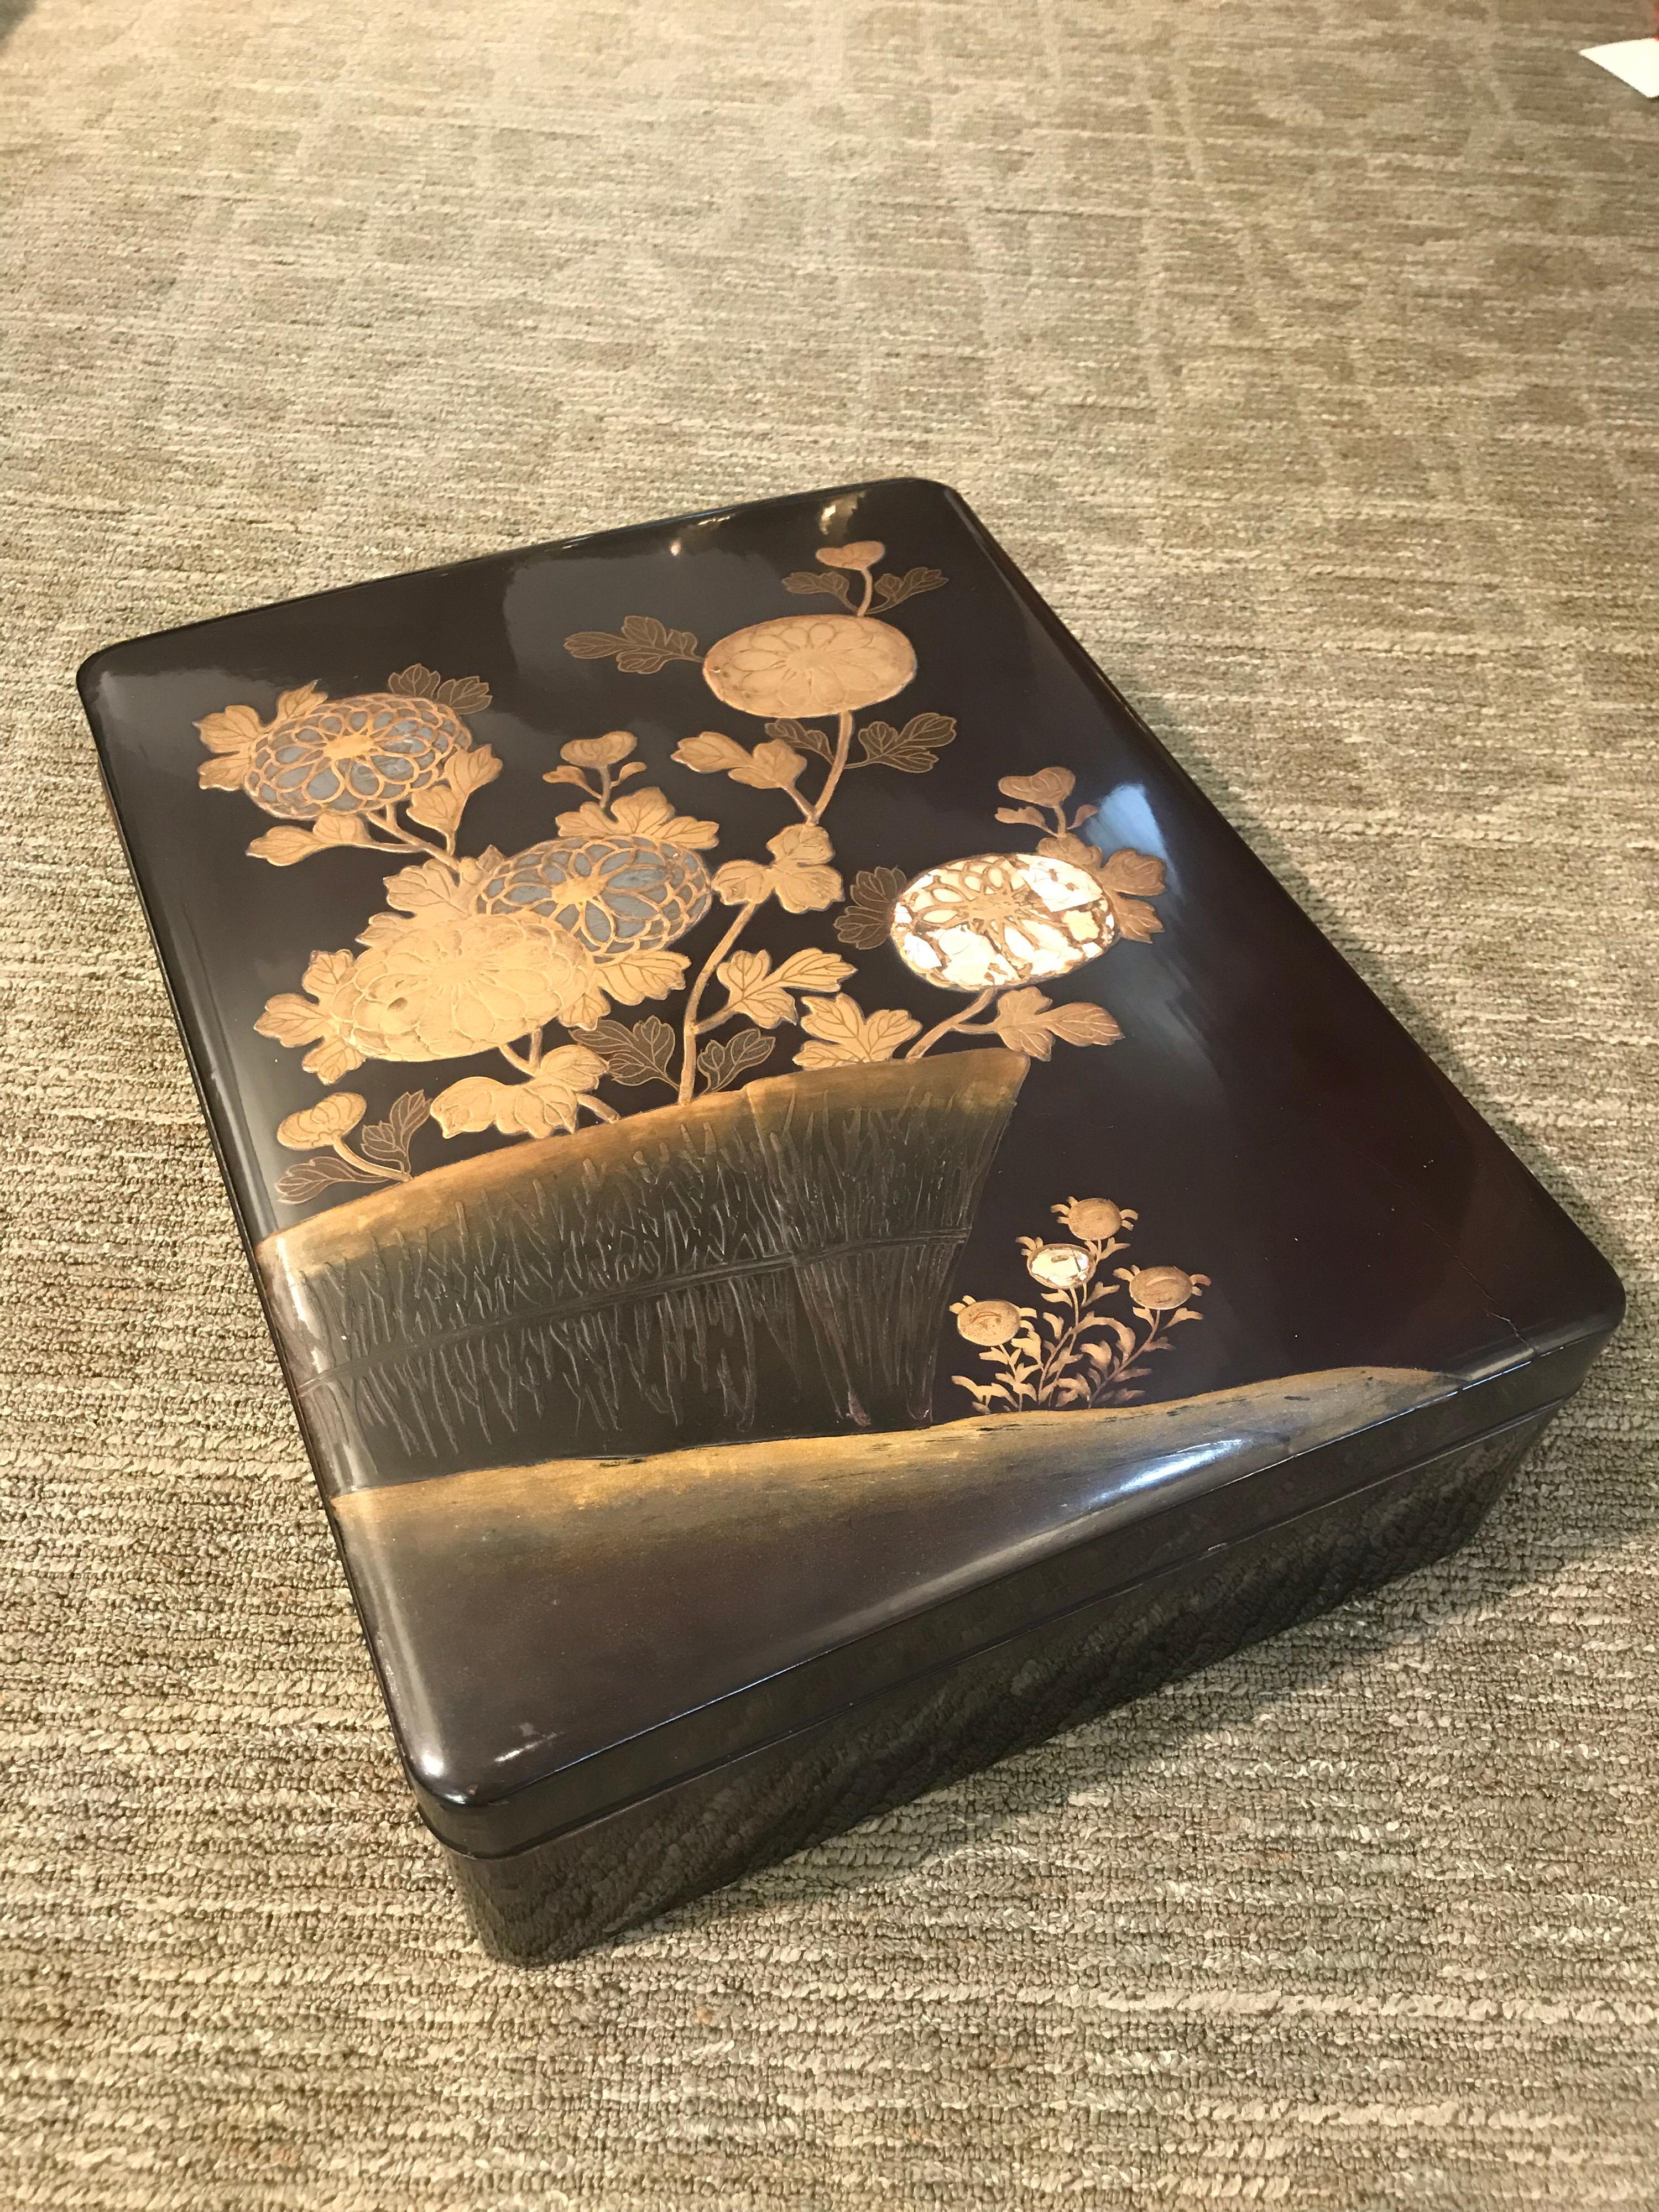 A large and beautifully decorated antique Japanese lacquer box.

Finished in very dark brown lacquer, the box is decorated with raised lacquer and mother of pearl design of flowers and a reed fence.

Inside is finished in speckled gold lacquer,